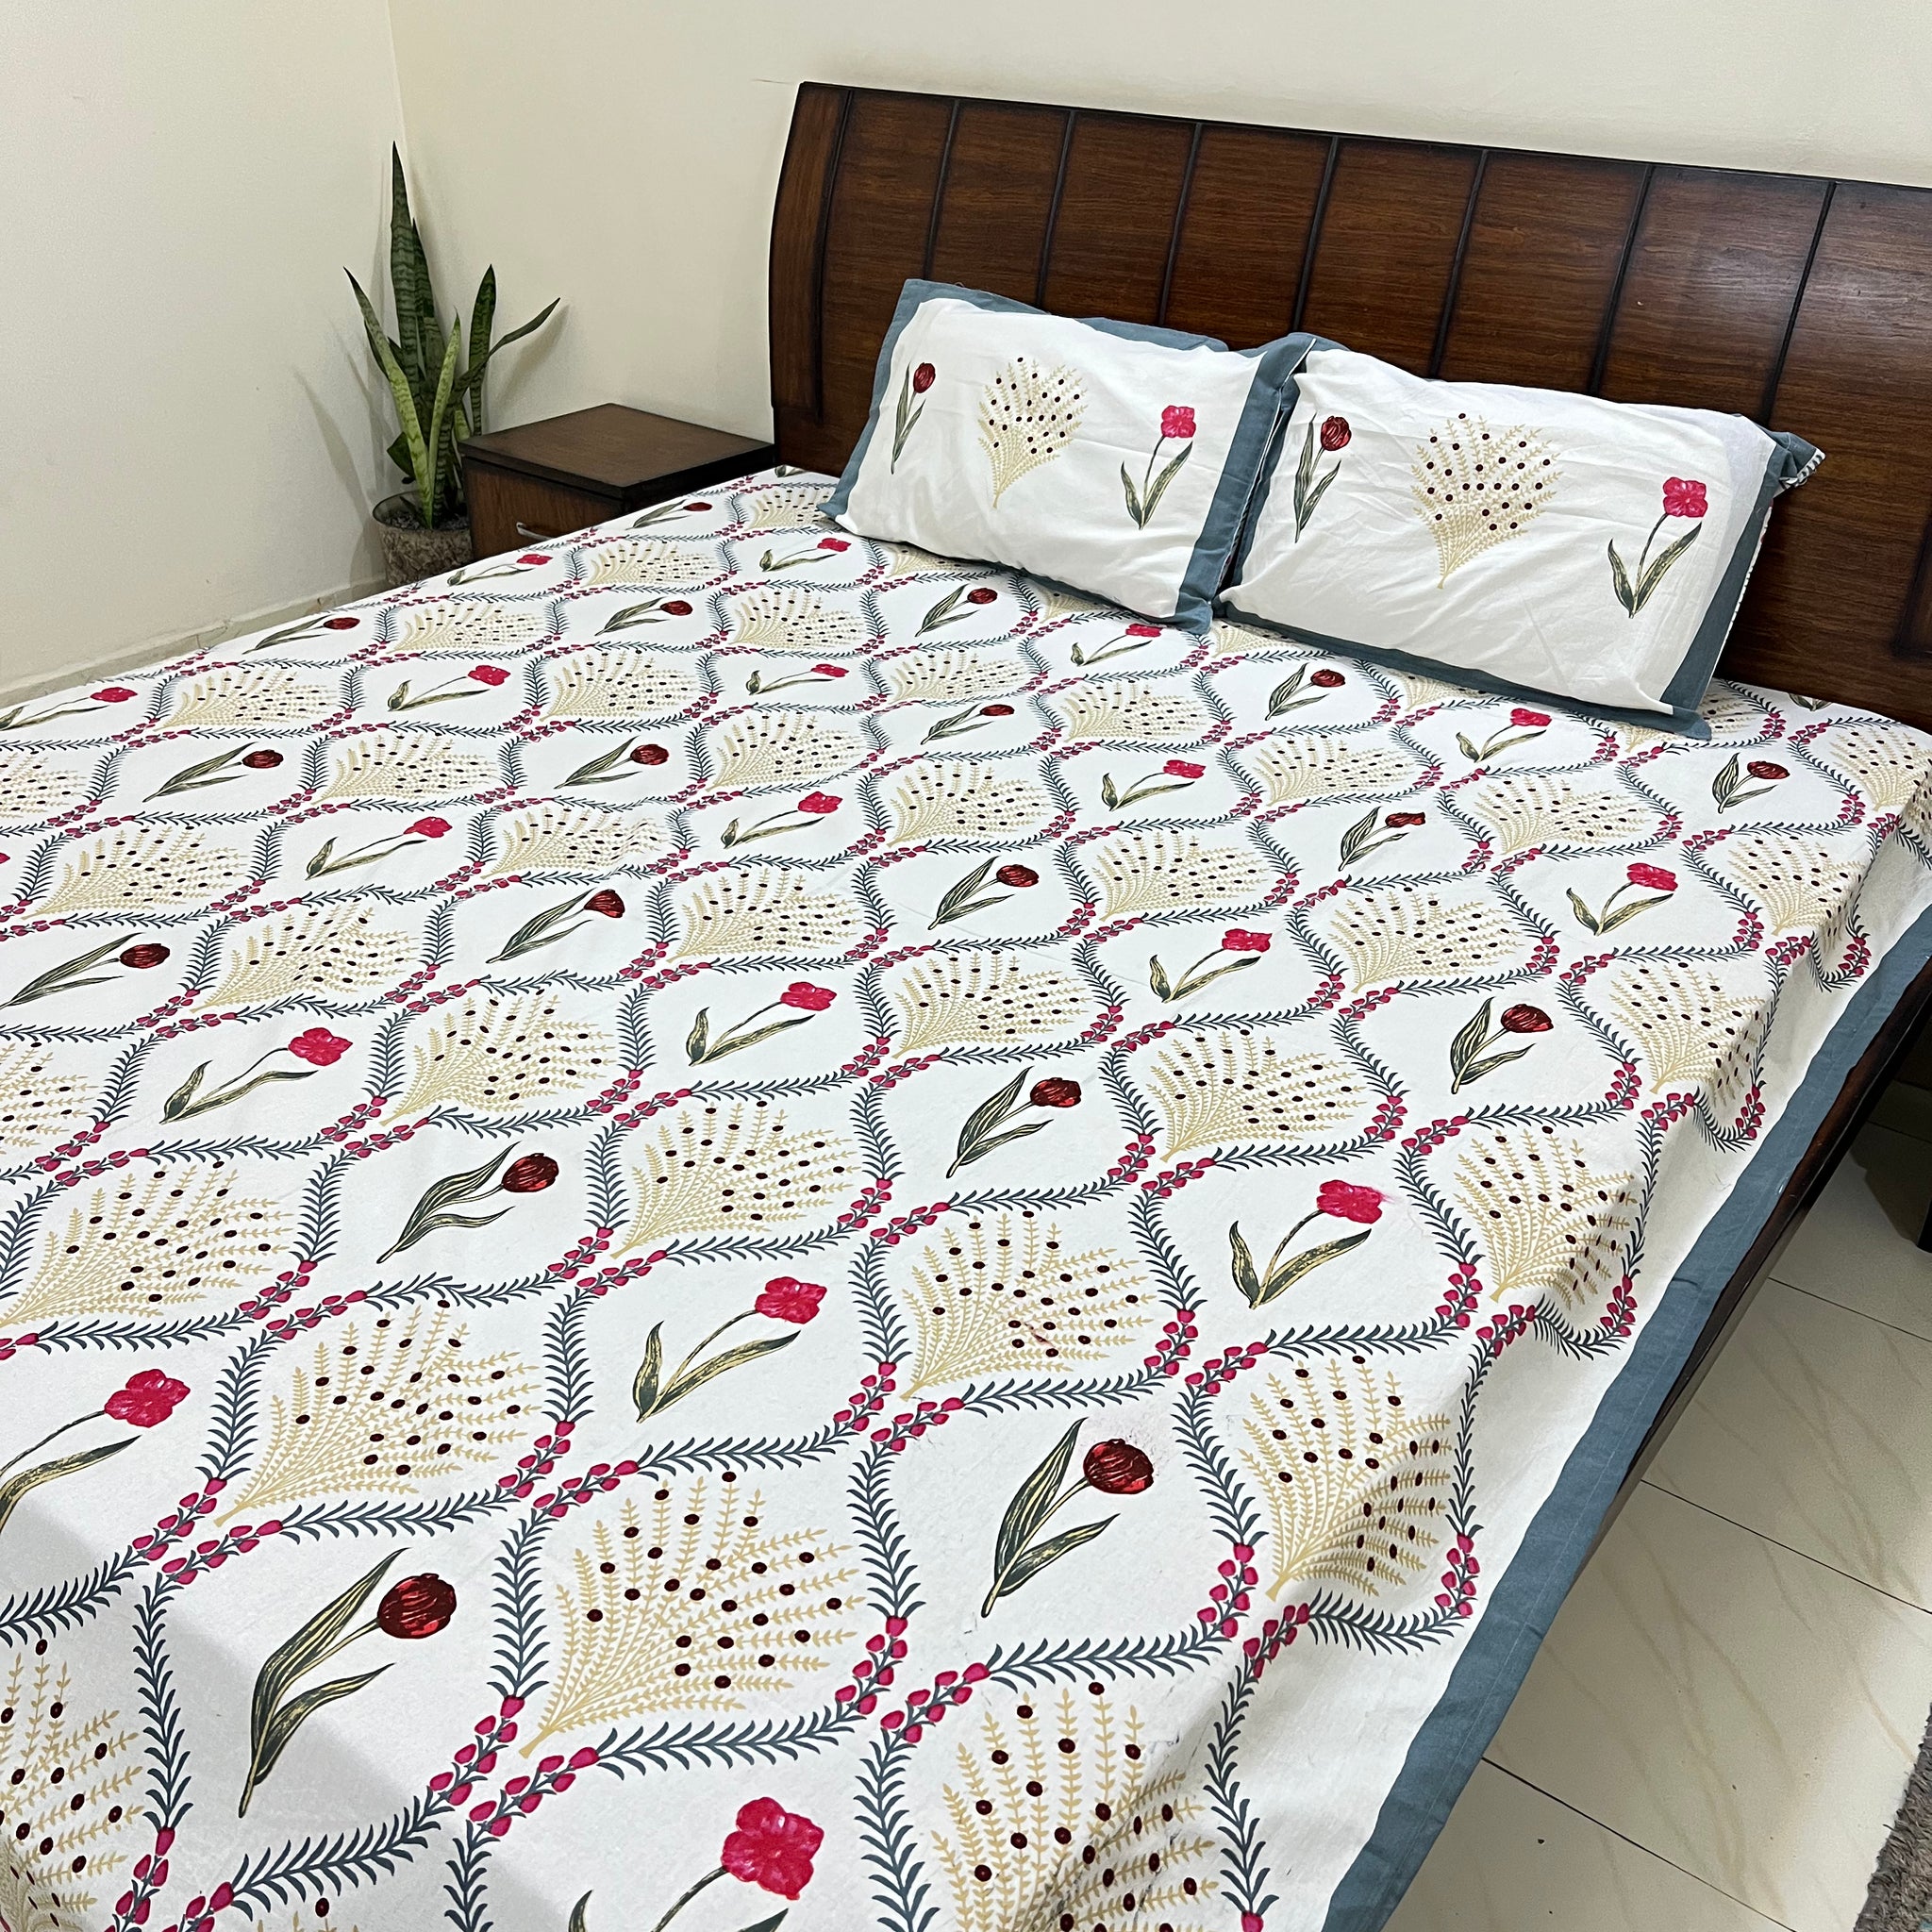 Floral Bail style bedsheet with Tulips